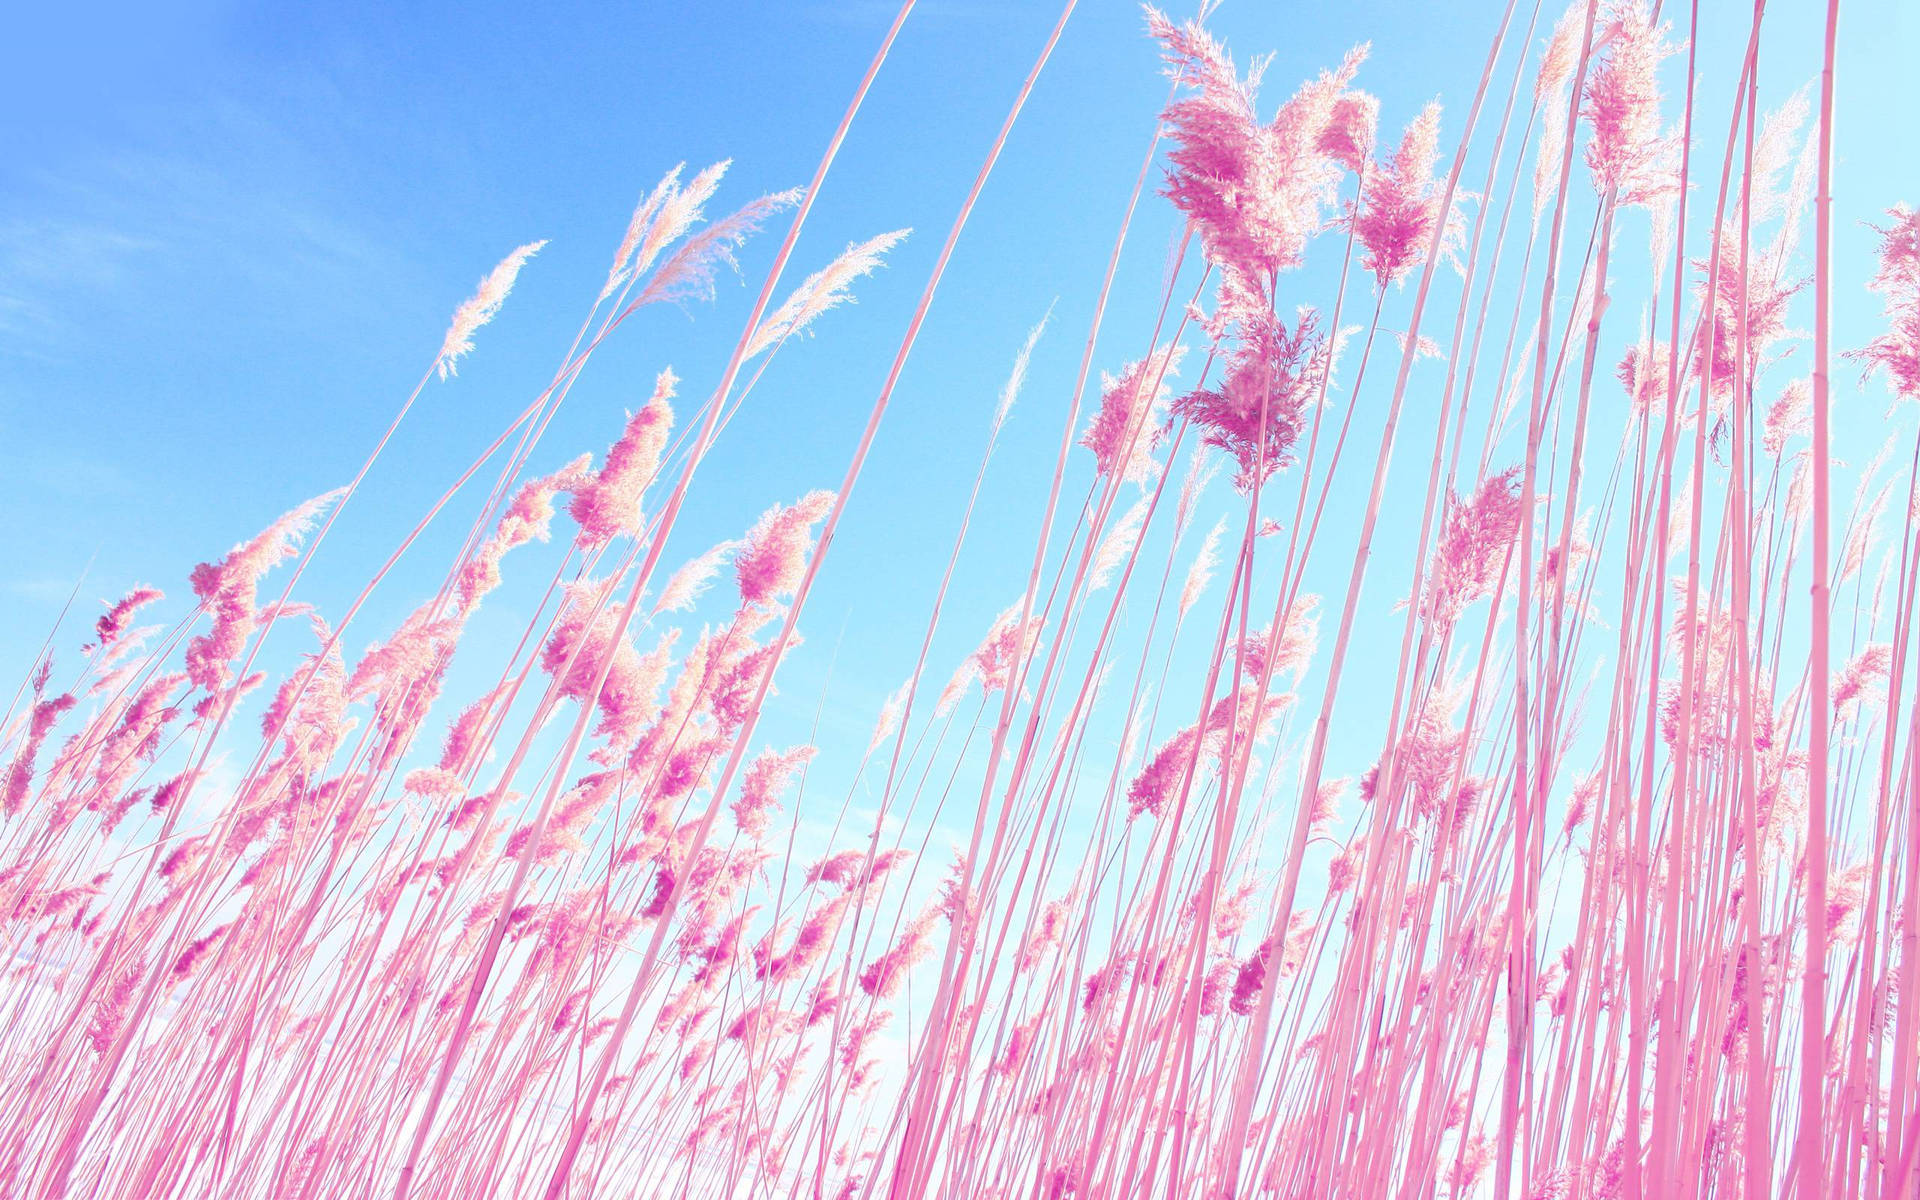 Pink Tall Grasses Under Blue Sky Background